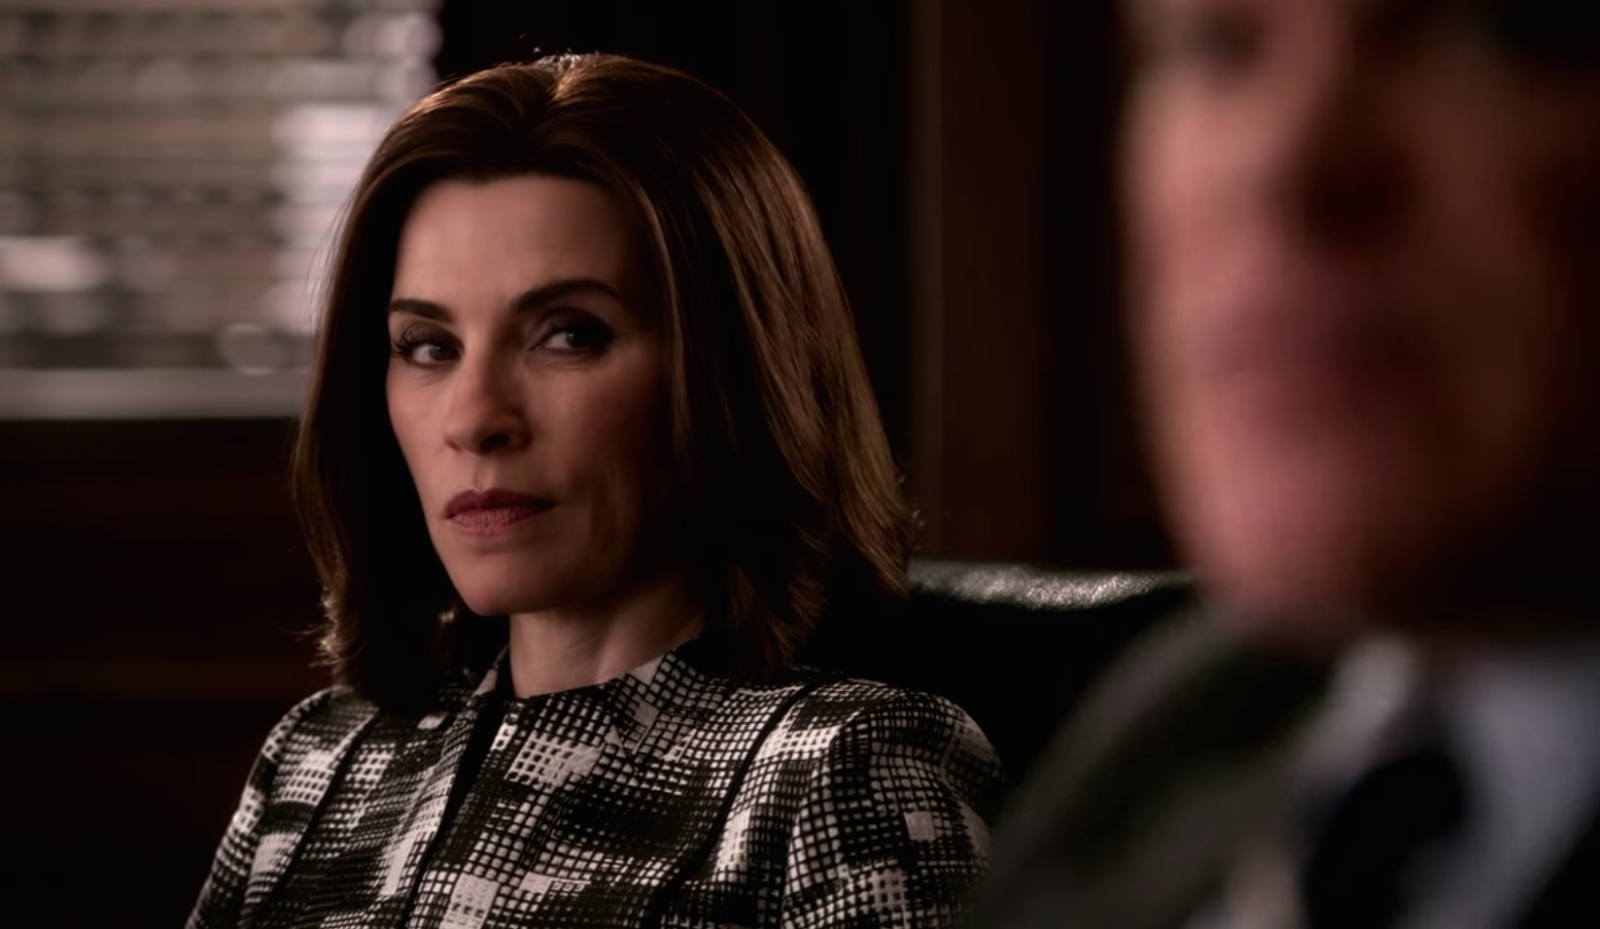 The Good Wife - Driven - Review: "That's A Terrifying Thought"